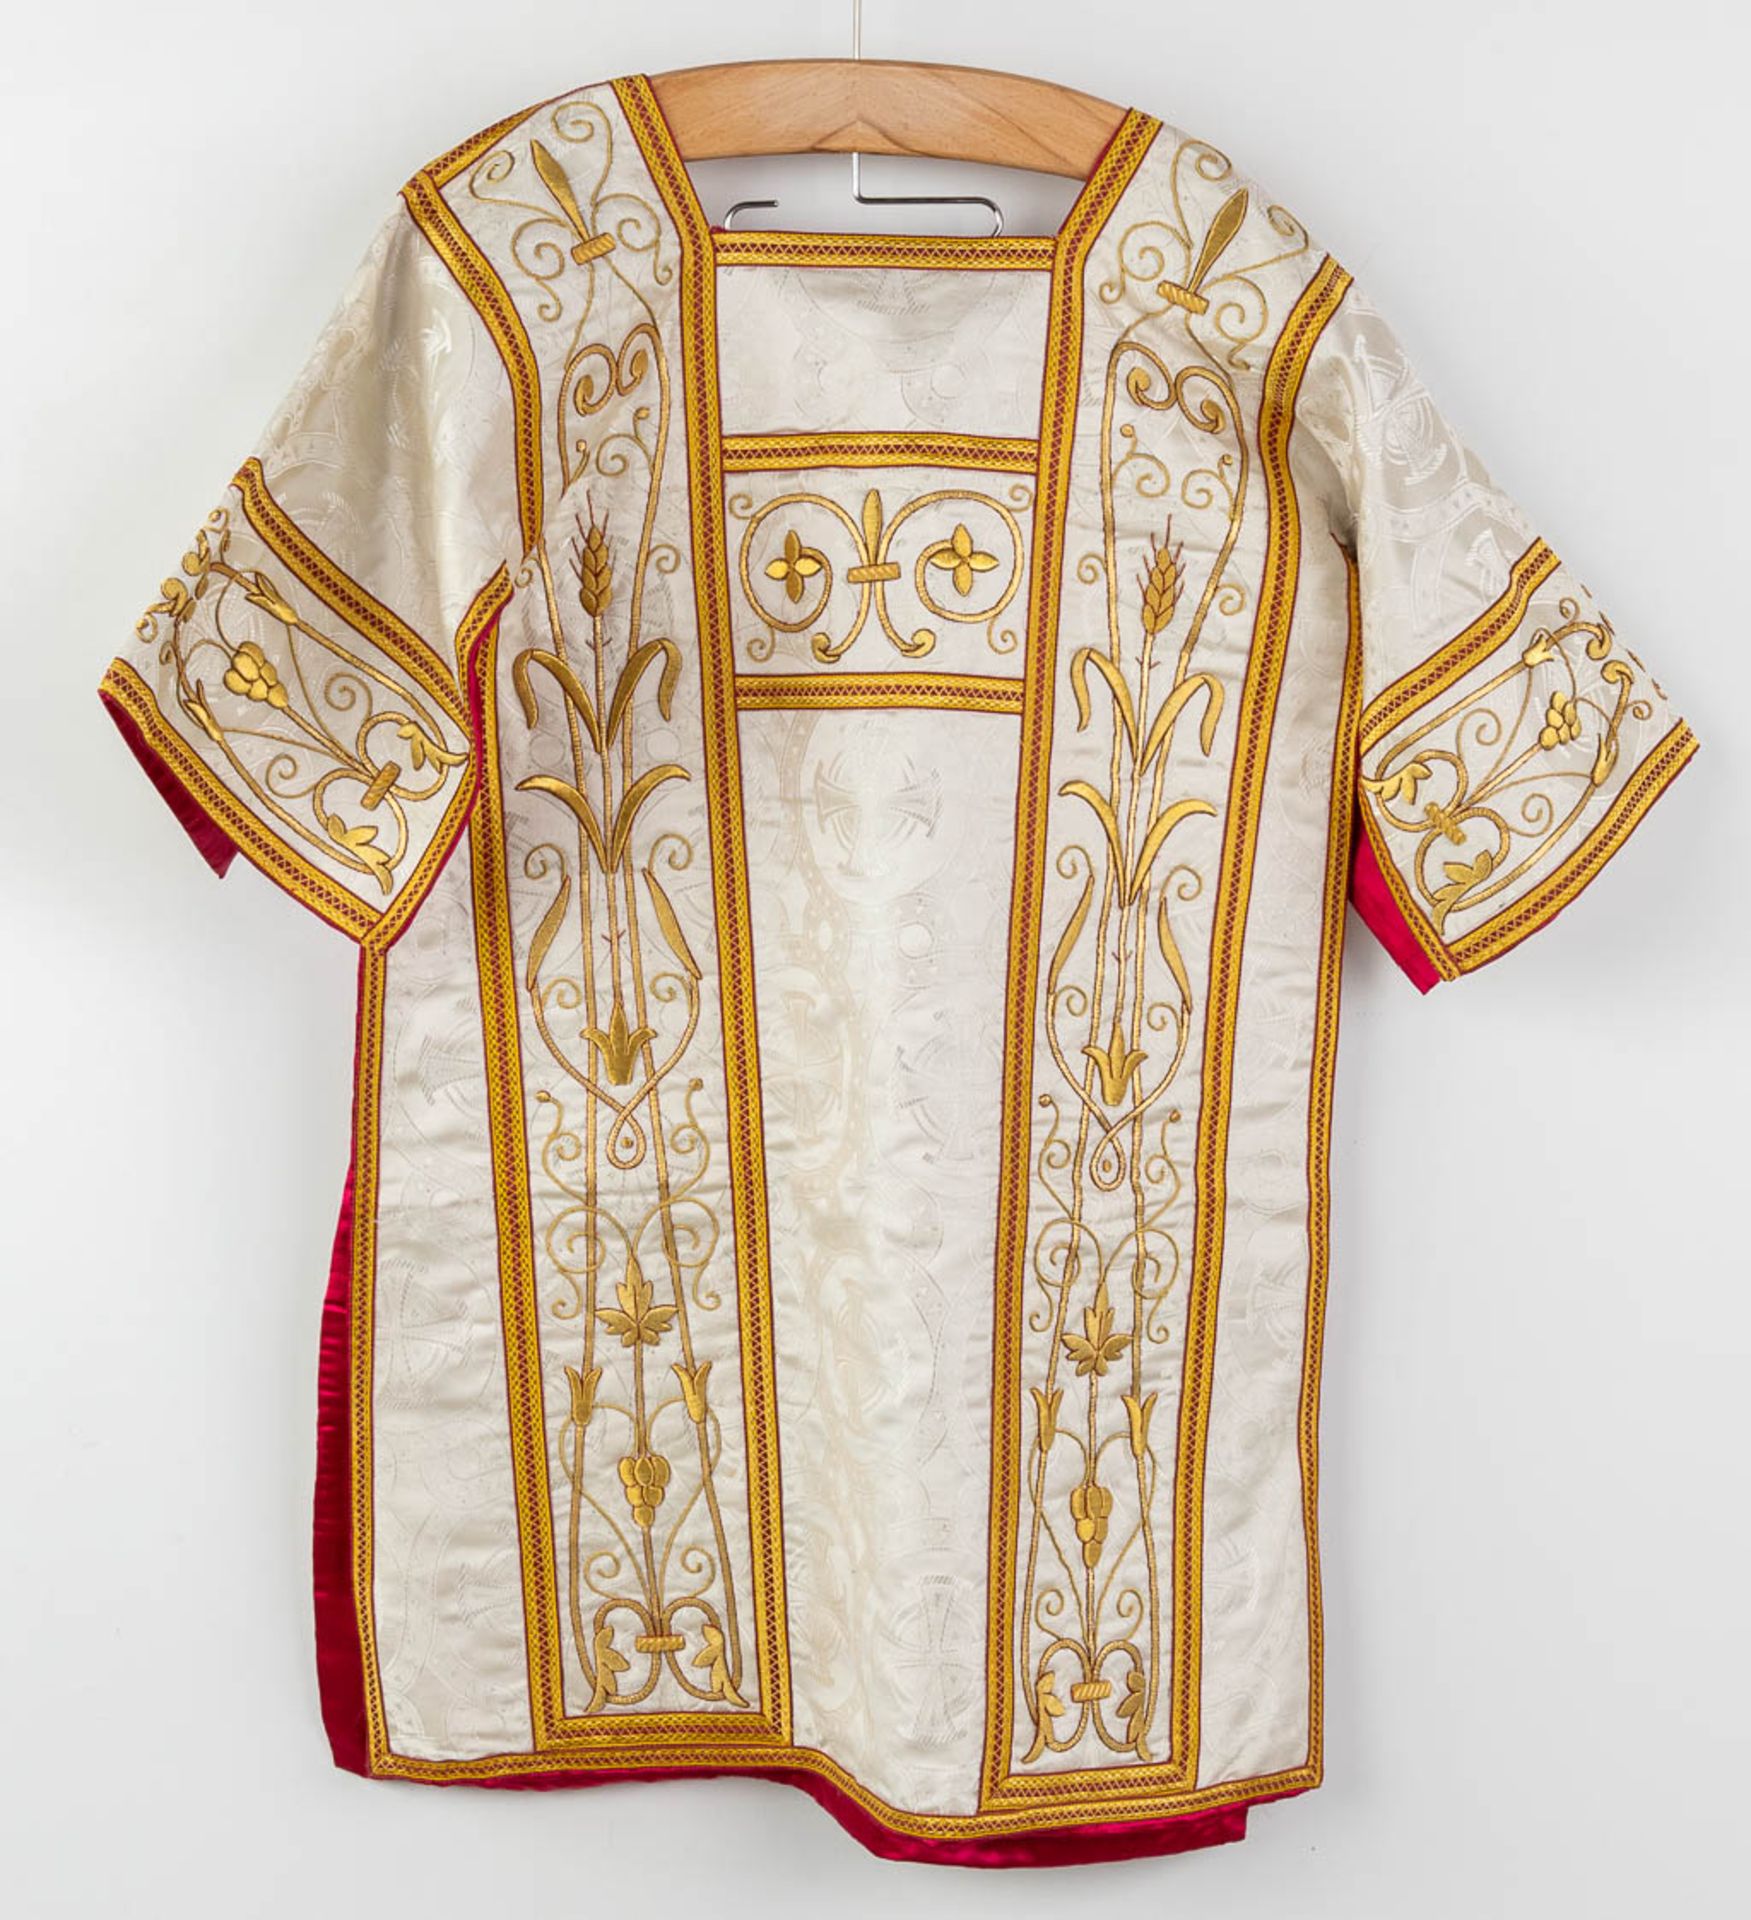 A matching set of Liturgical robes, 4 dalmatics, maniples and stola. - Image 8 of 17